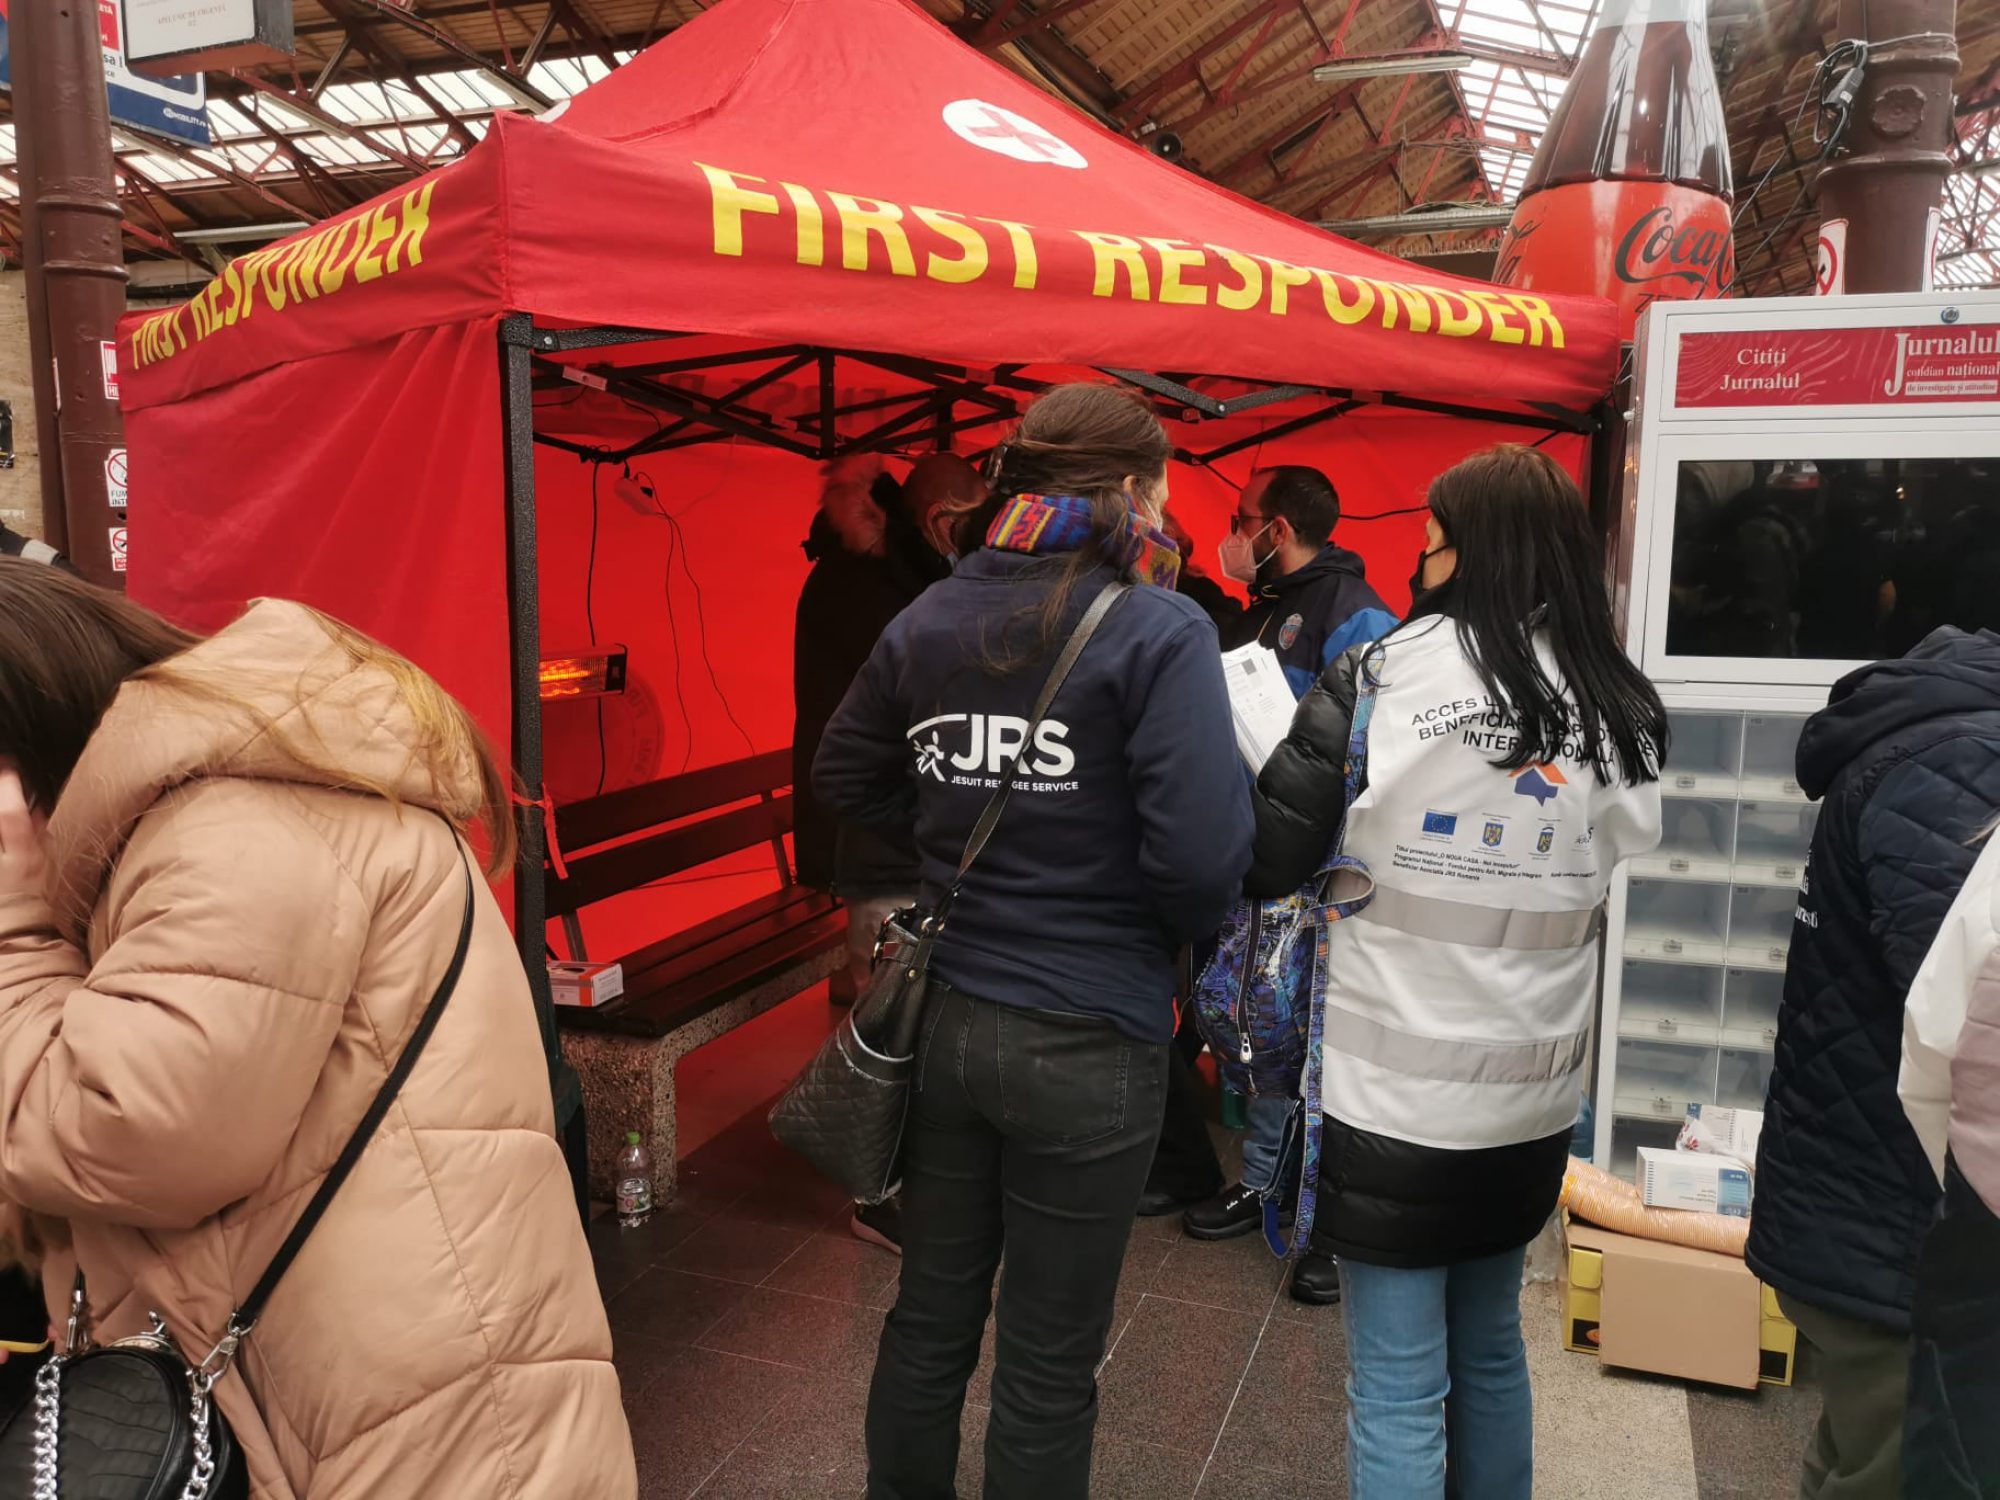 JRS Romania staff is at North Station, assisting refugees arriving by train from Ukraine.